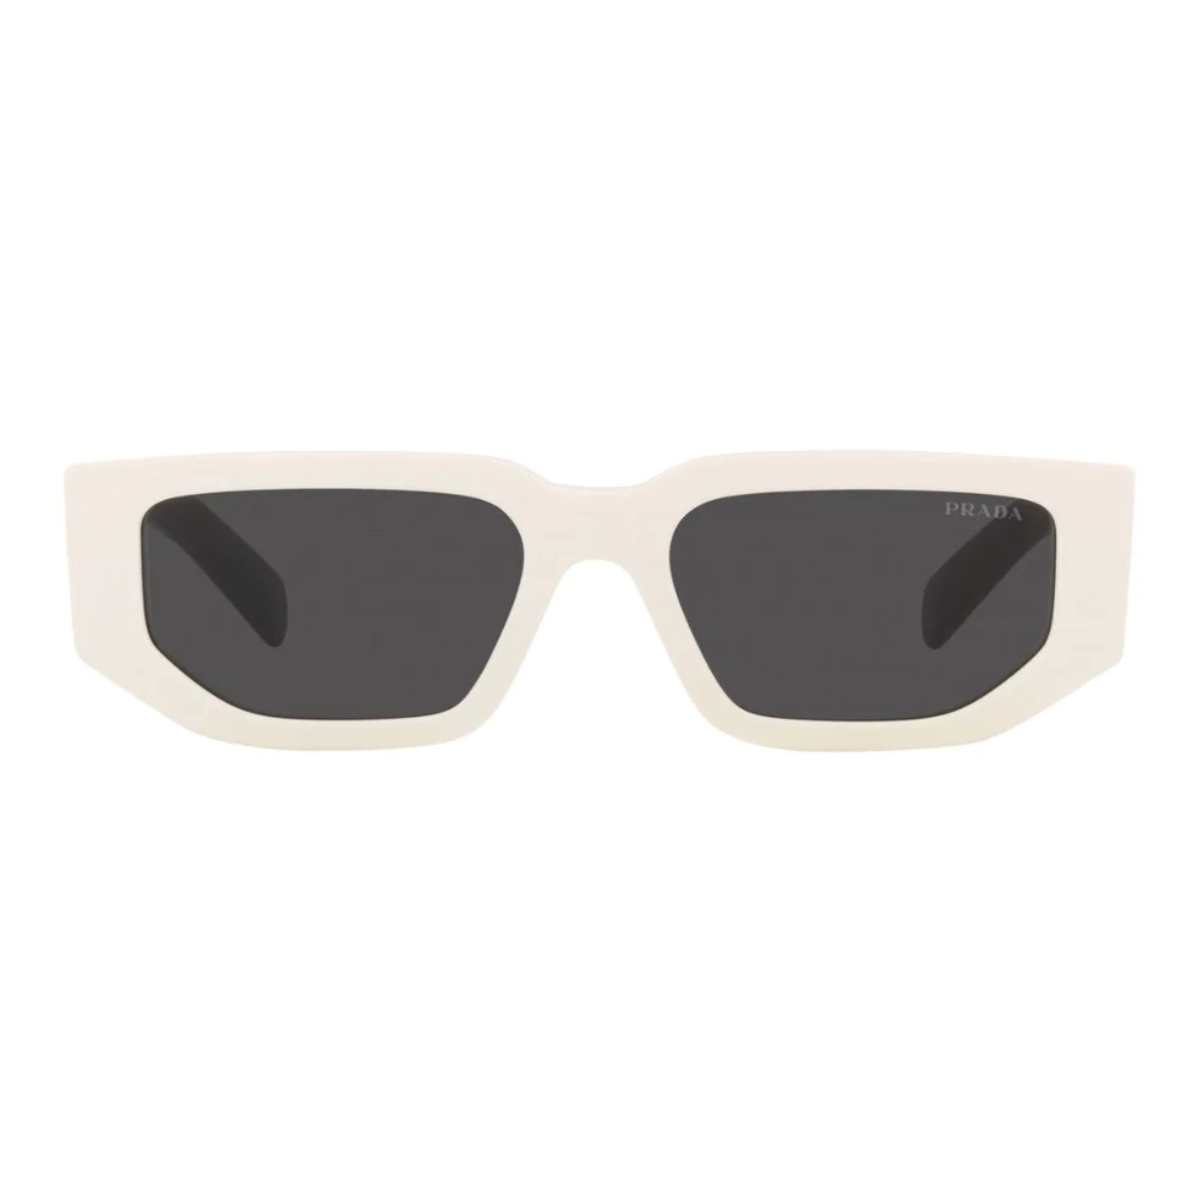 "Shop now at Optorium for Prada SPR 09Z 142-5S0 sunglasses, suitable for both men and women. These stylish shades feature a cool grey rectangle design with a trendy butterfly shape."